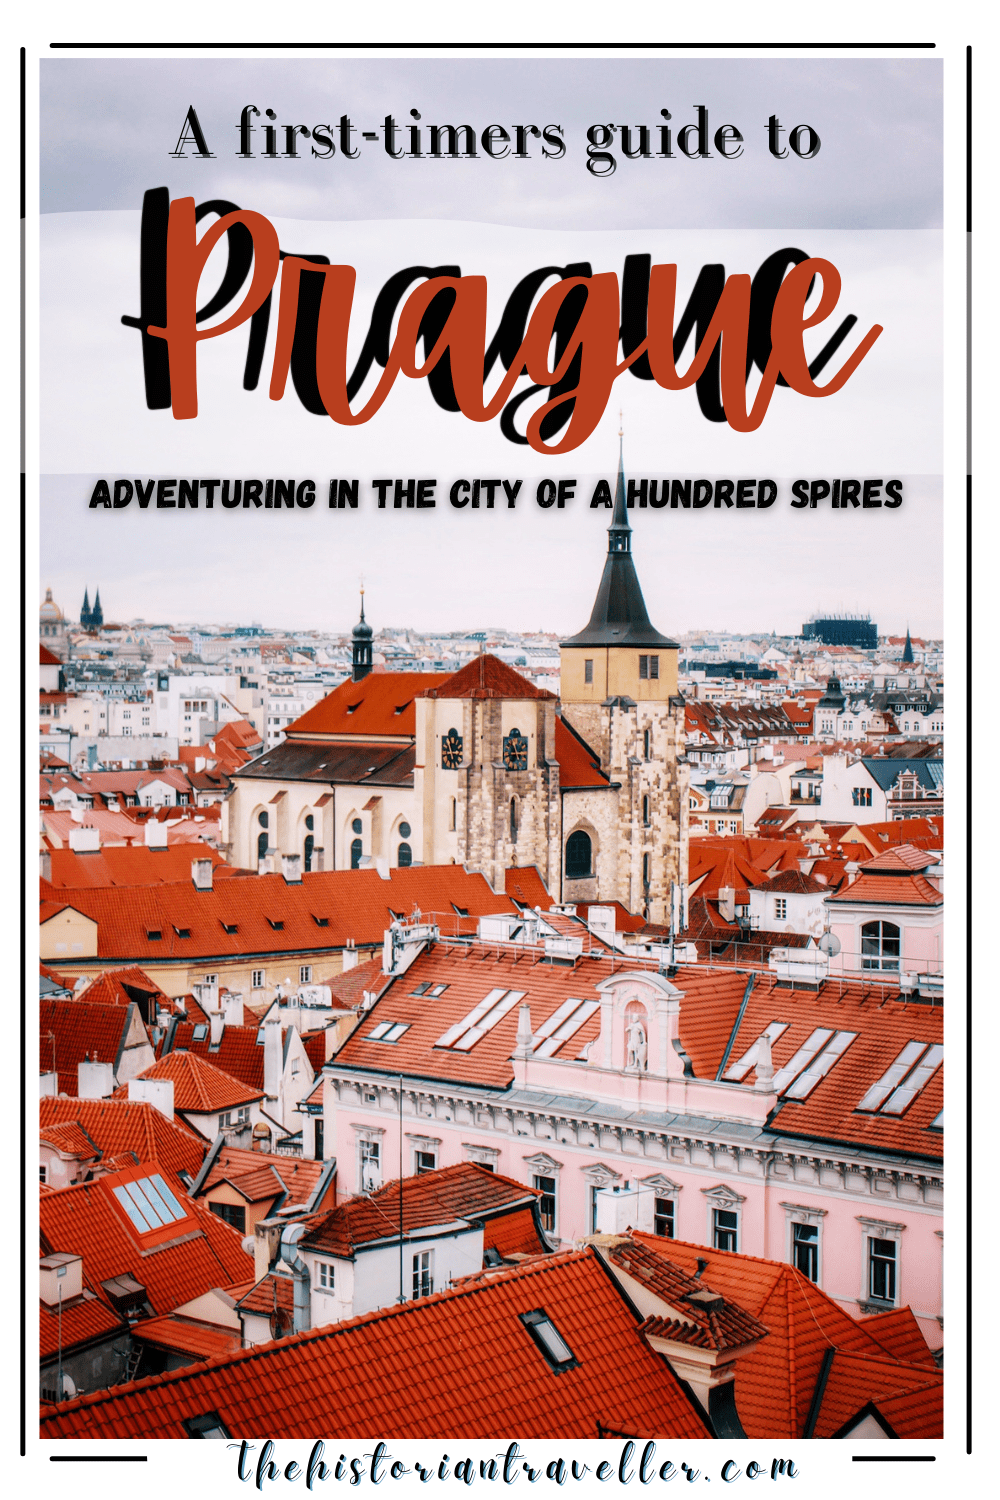 First-timers guide to Prague 